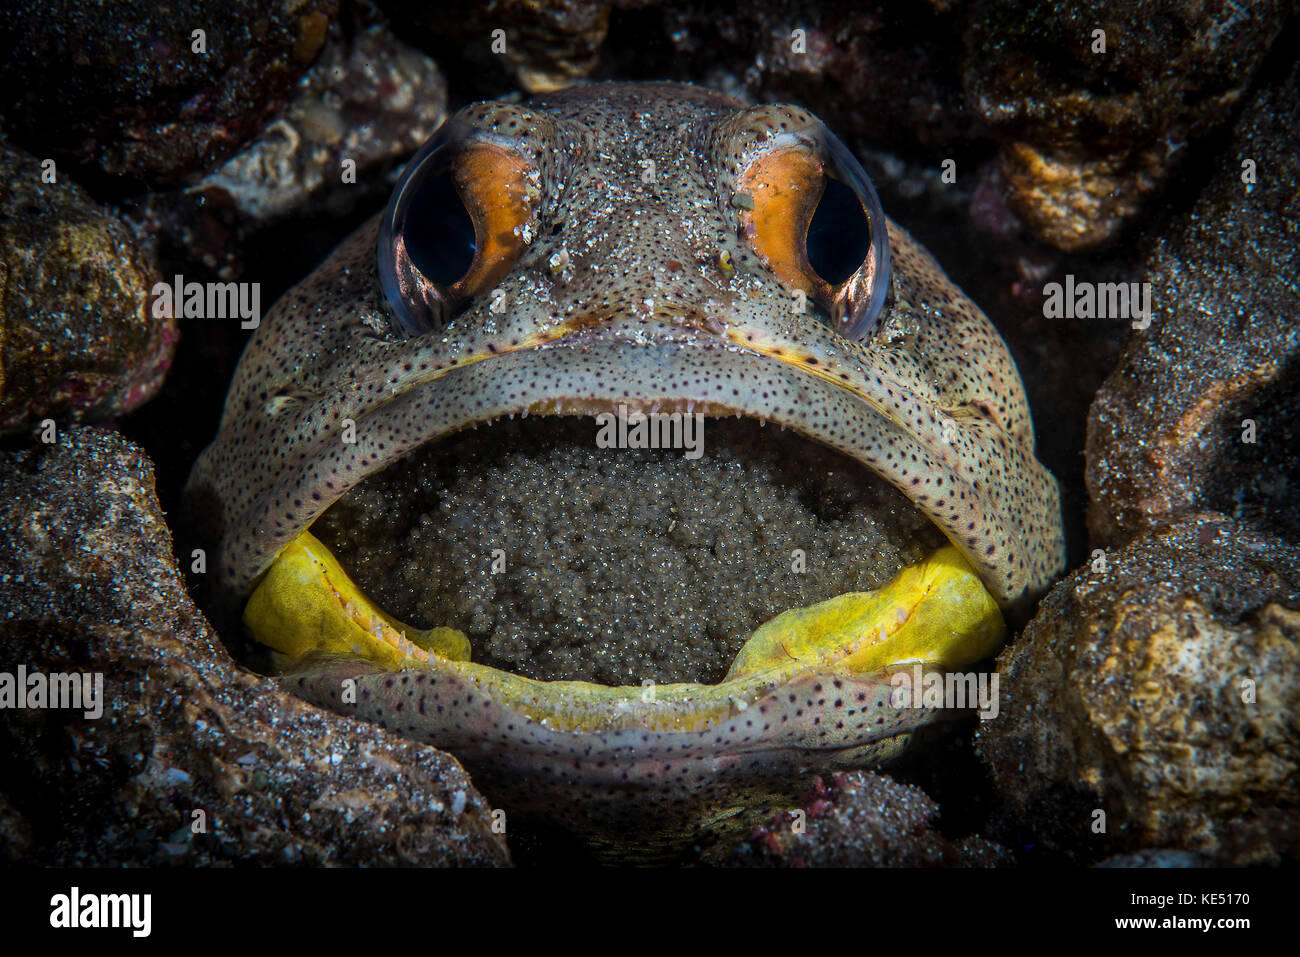 A giant jawfish brooding eggs in its mouth, Sea of Cortez, Mexico. Stock Photo